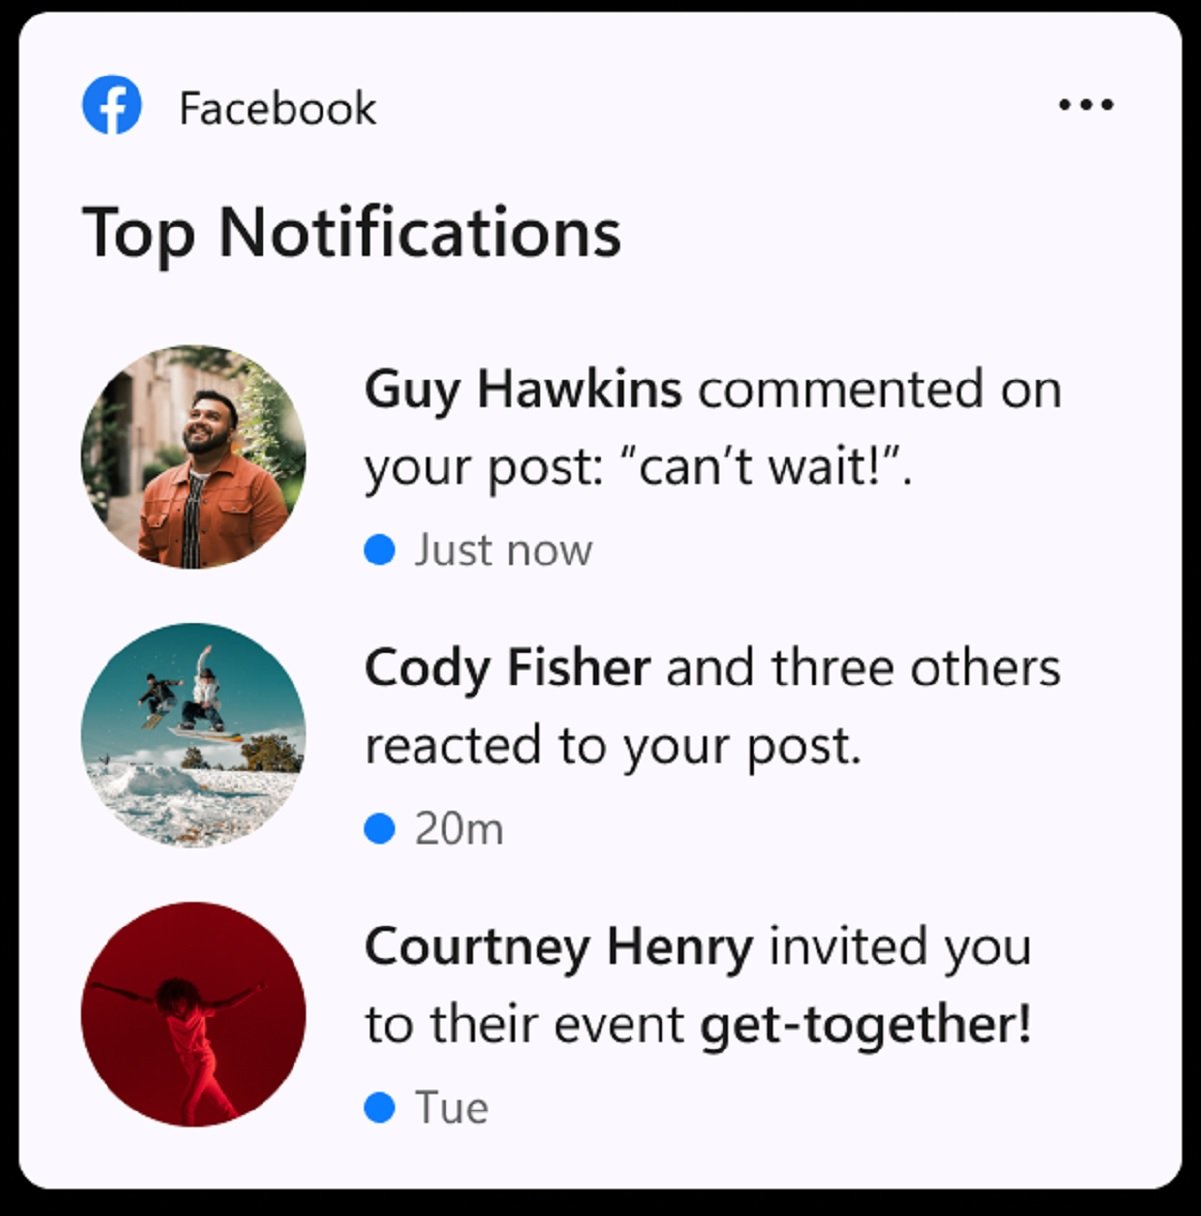 Windows 11 is getting a Facebook widget and other novel aspects